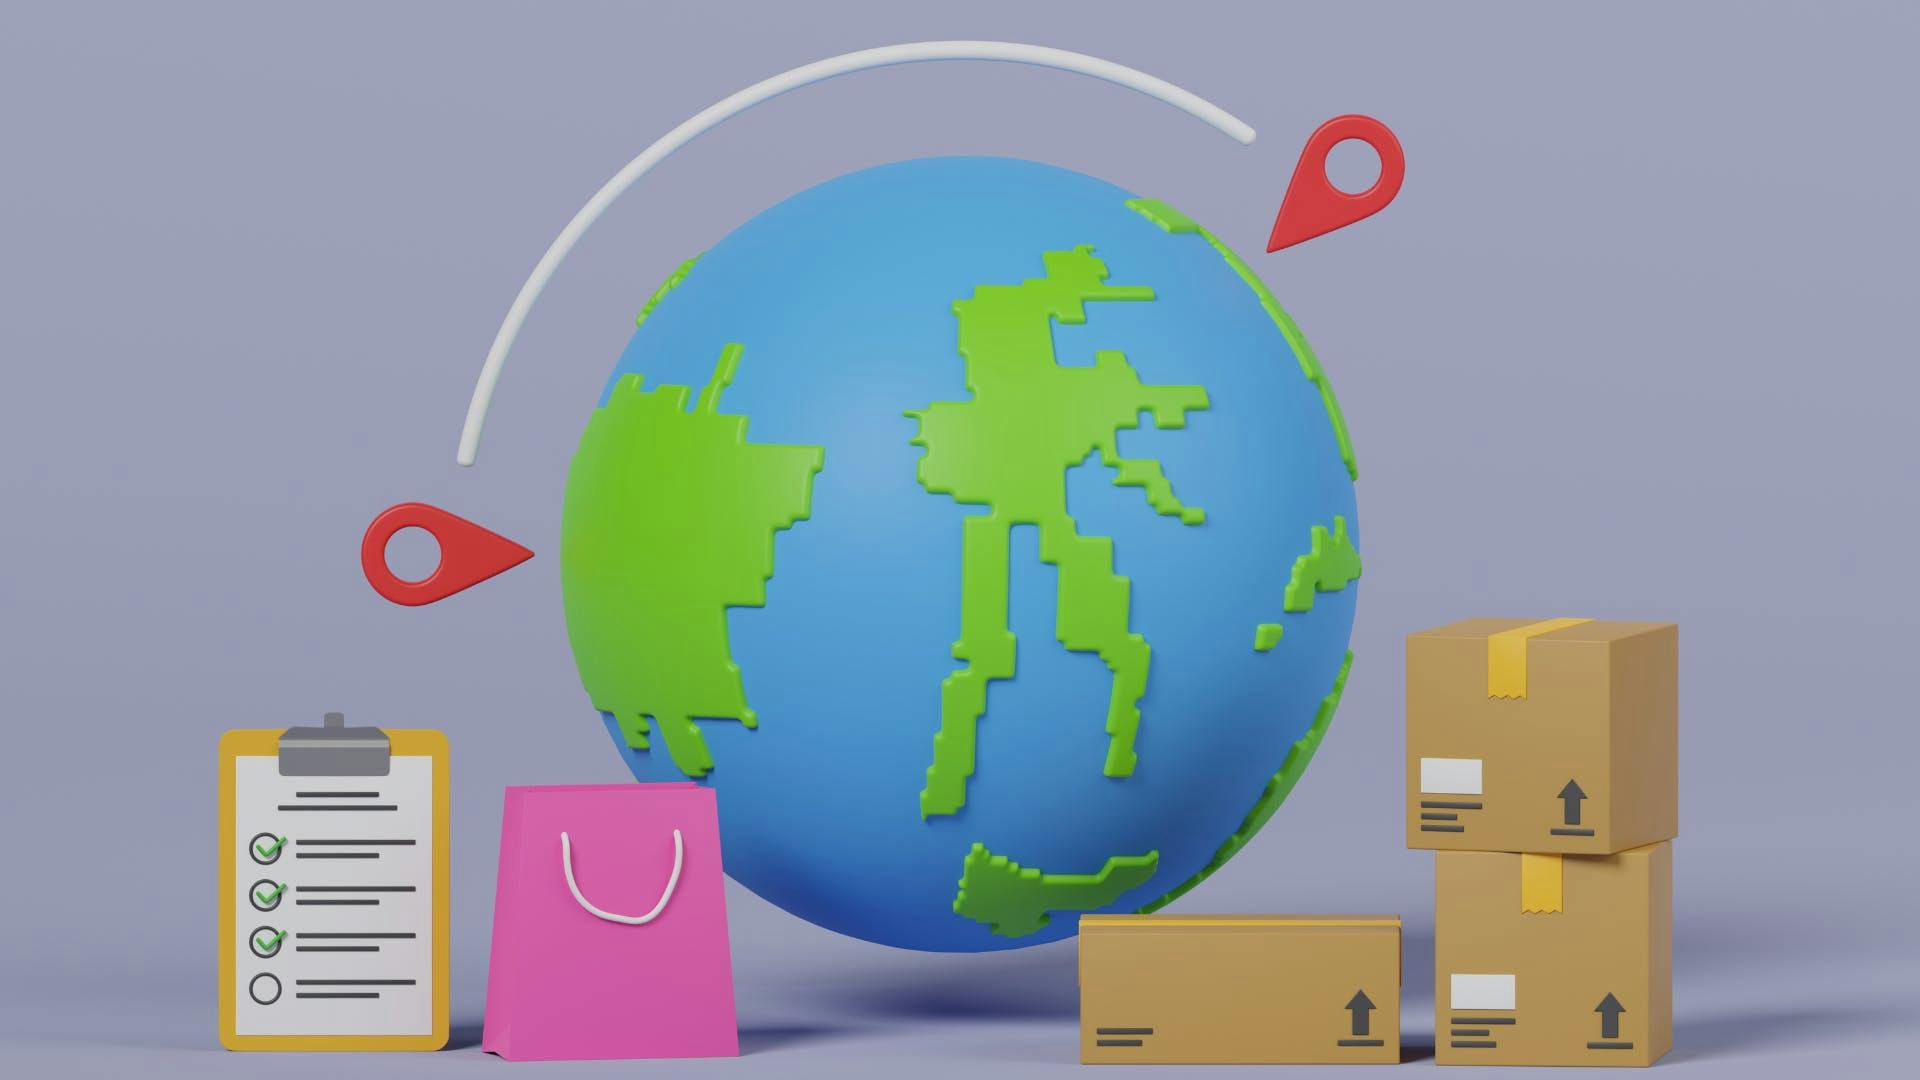 World and packages are imaged depicting easy acces to anywhere in the world. 